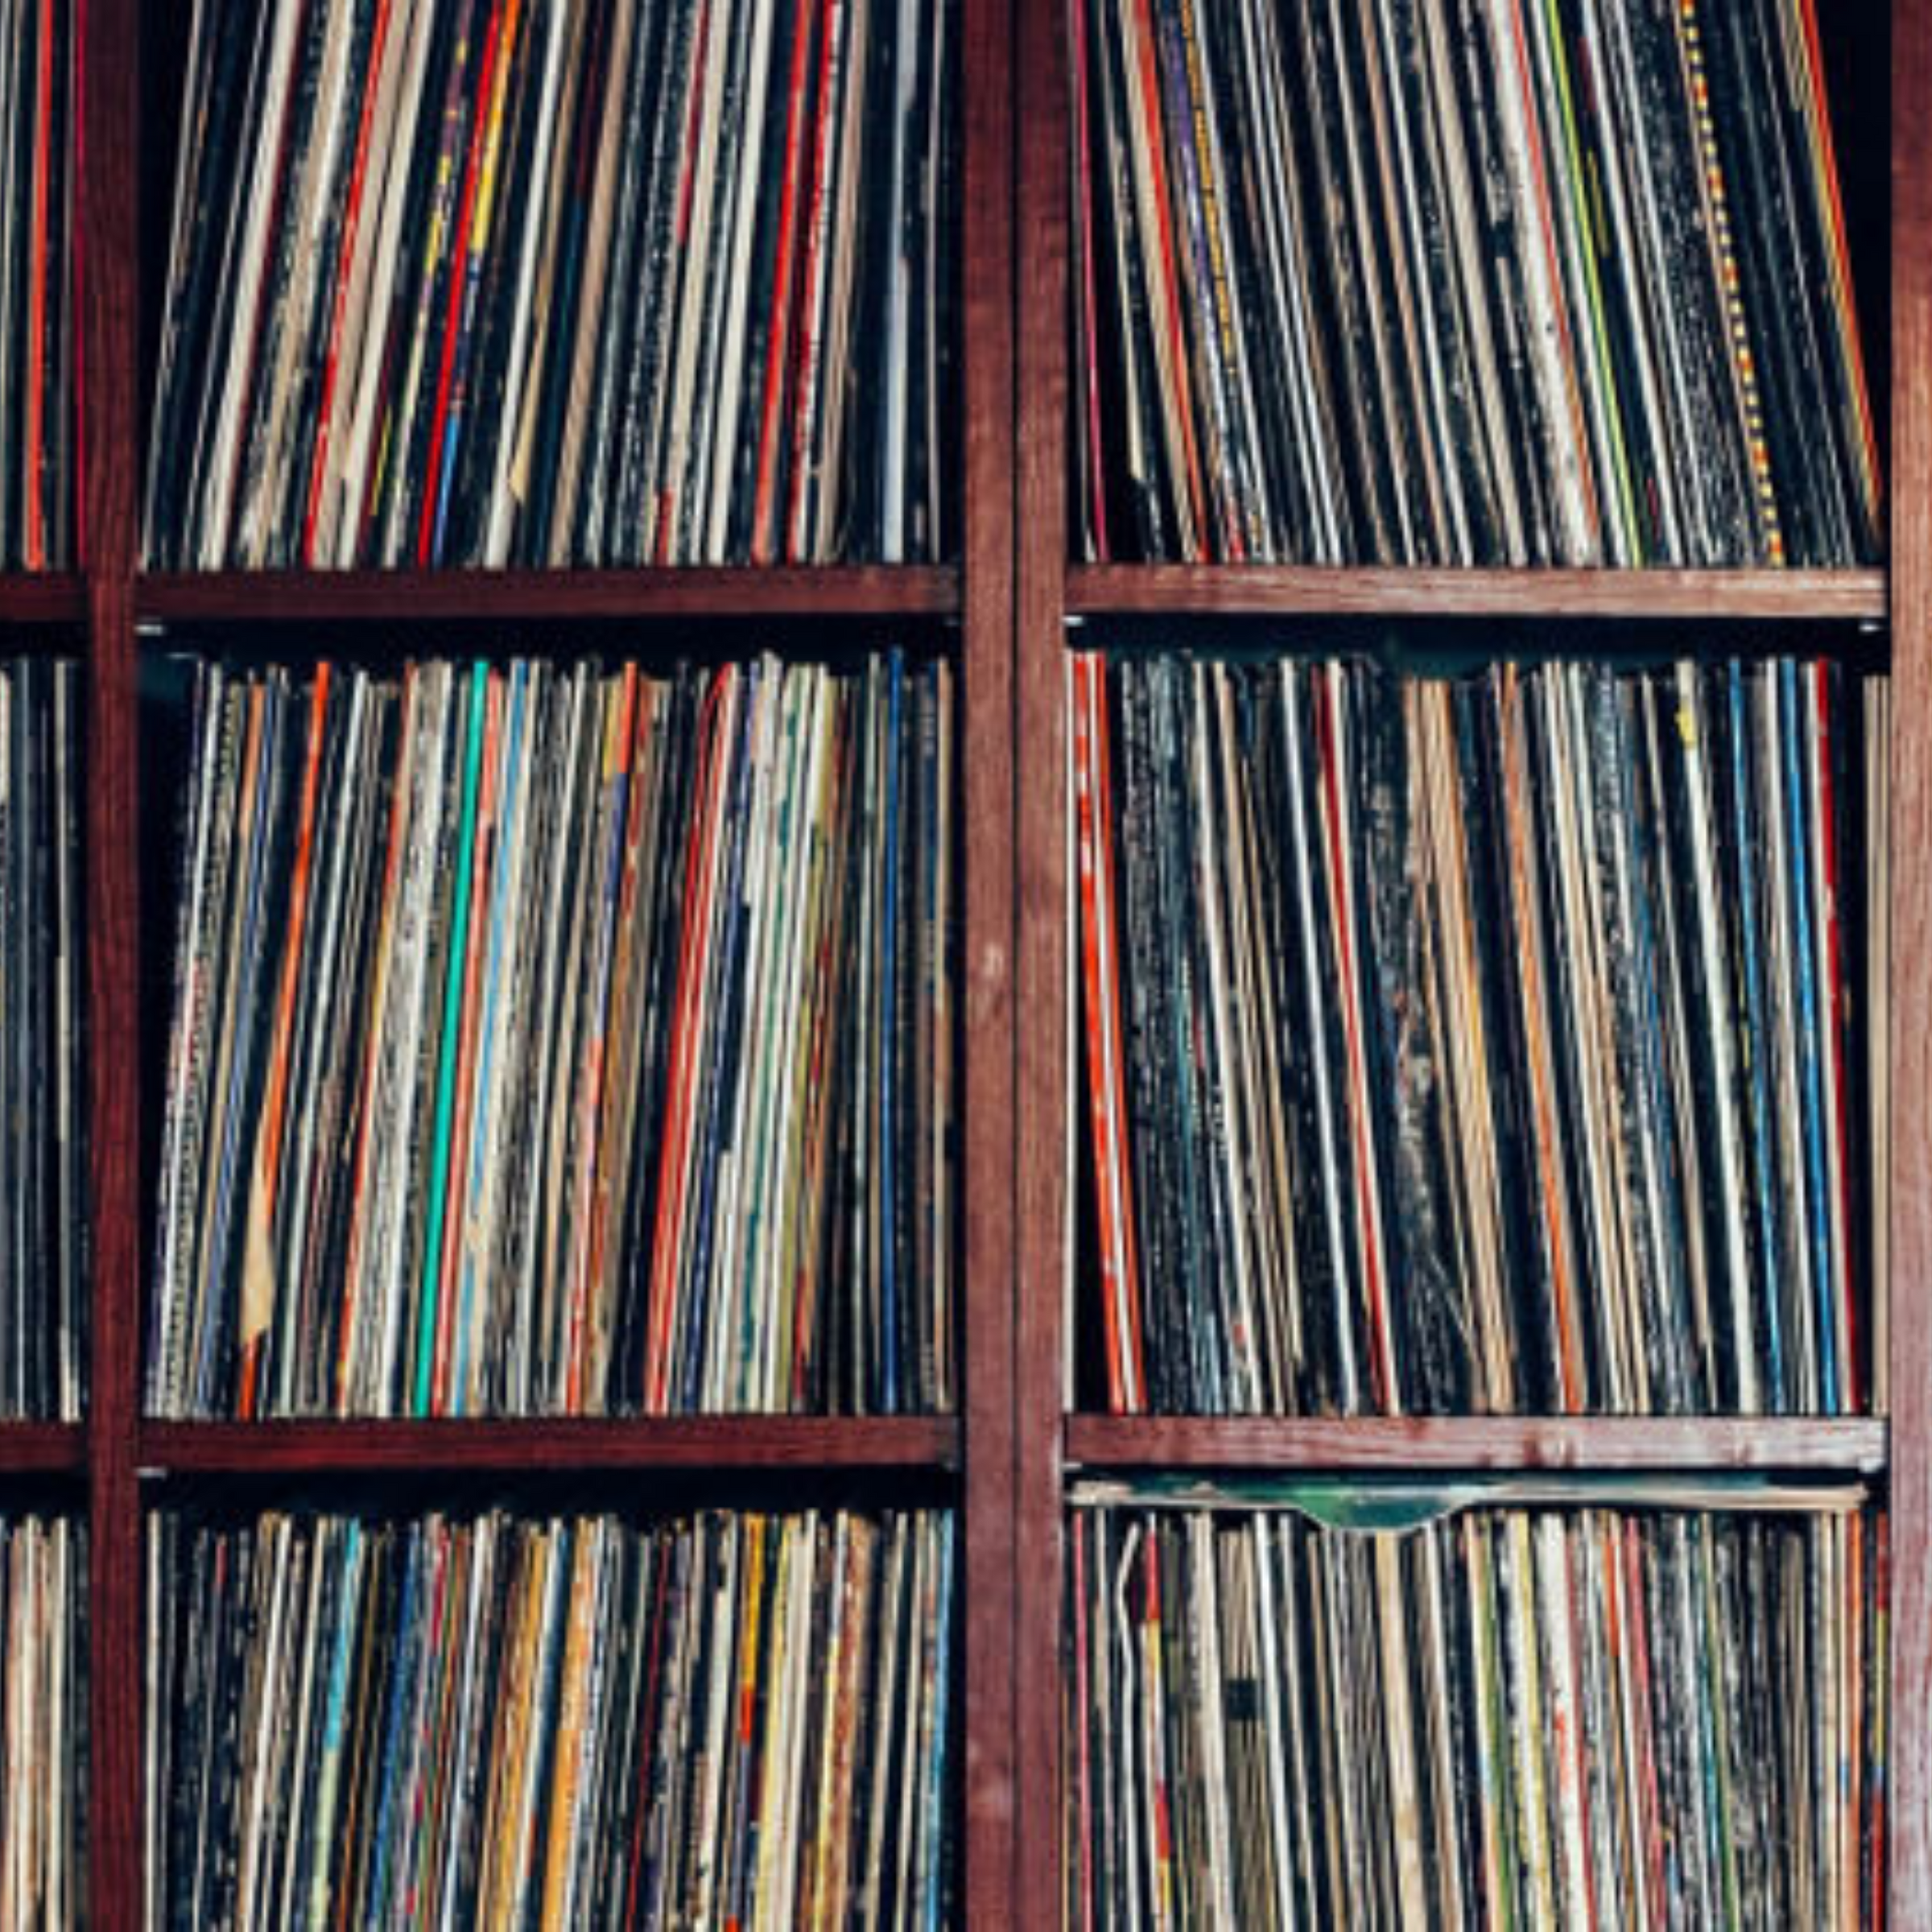 Full Music Collection